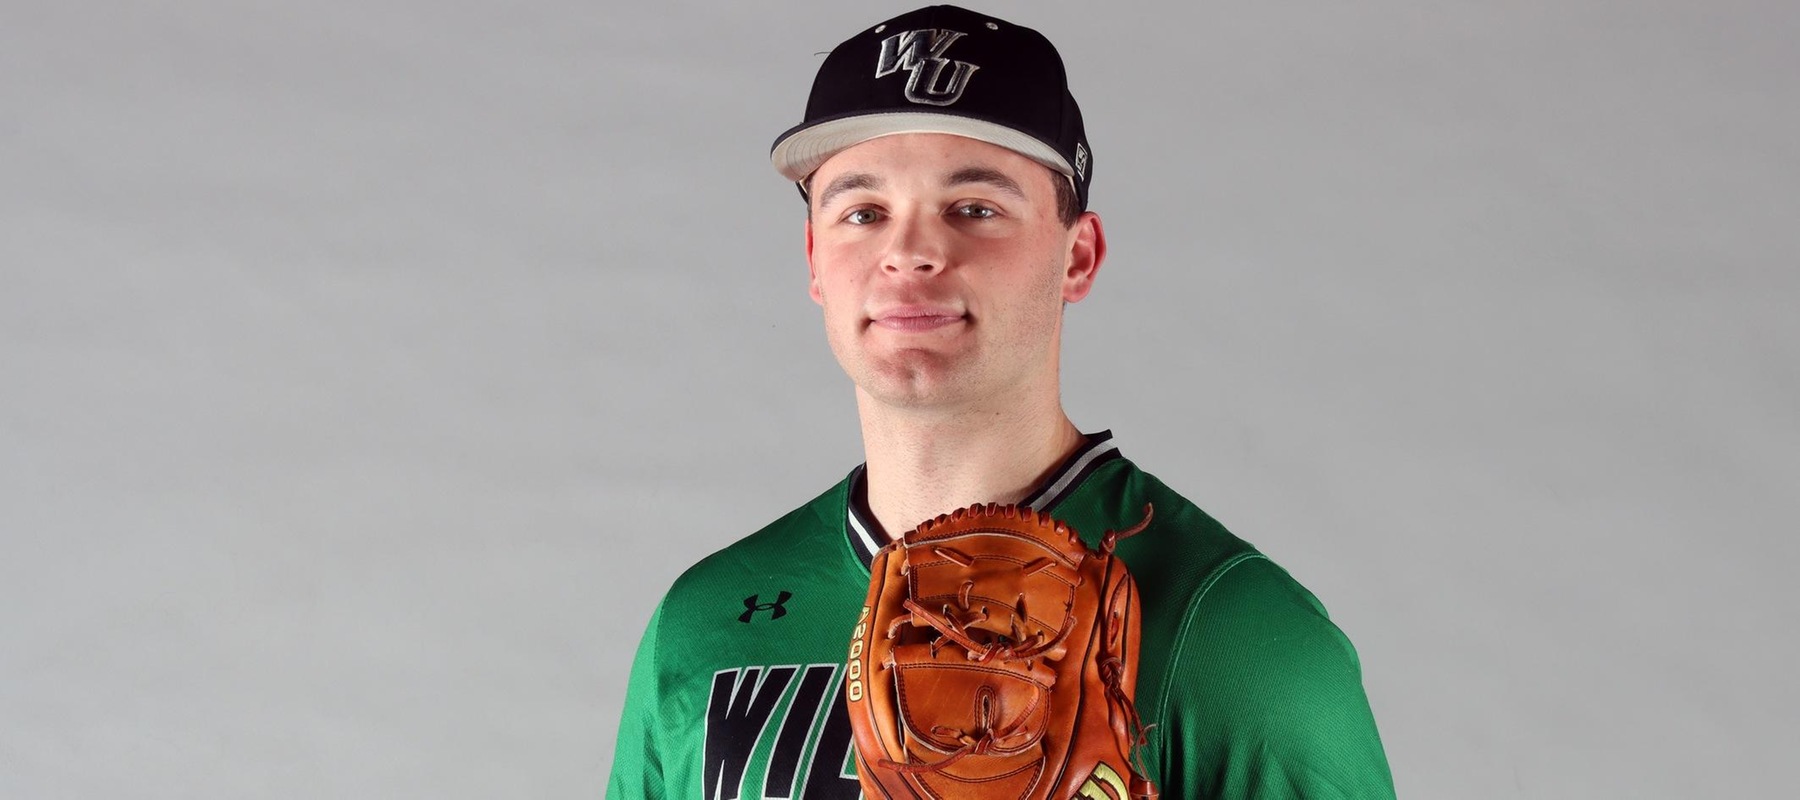 Photo of Rich Albrecht who struck out 7 Molloy batters in 5 innings pitched, allowing only 1 run on 2 hits. Copyright 2023; Wilmington University. All rights reserved. Photo by Dan Lauletta.